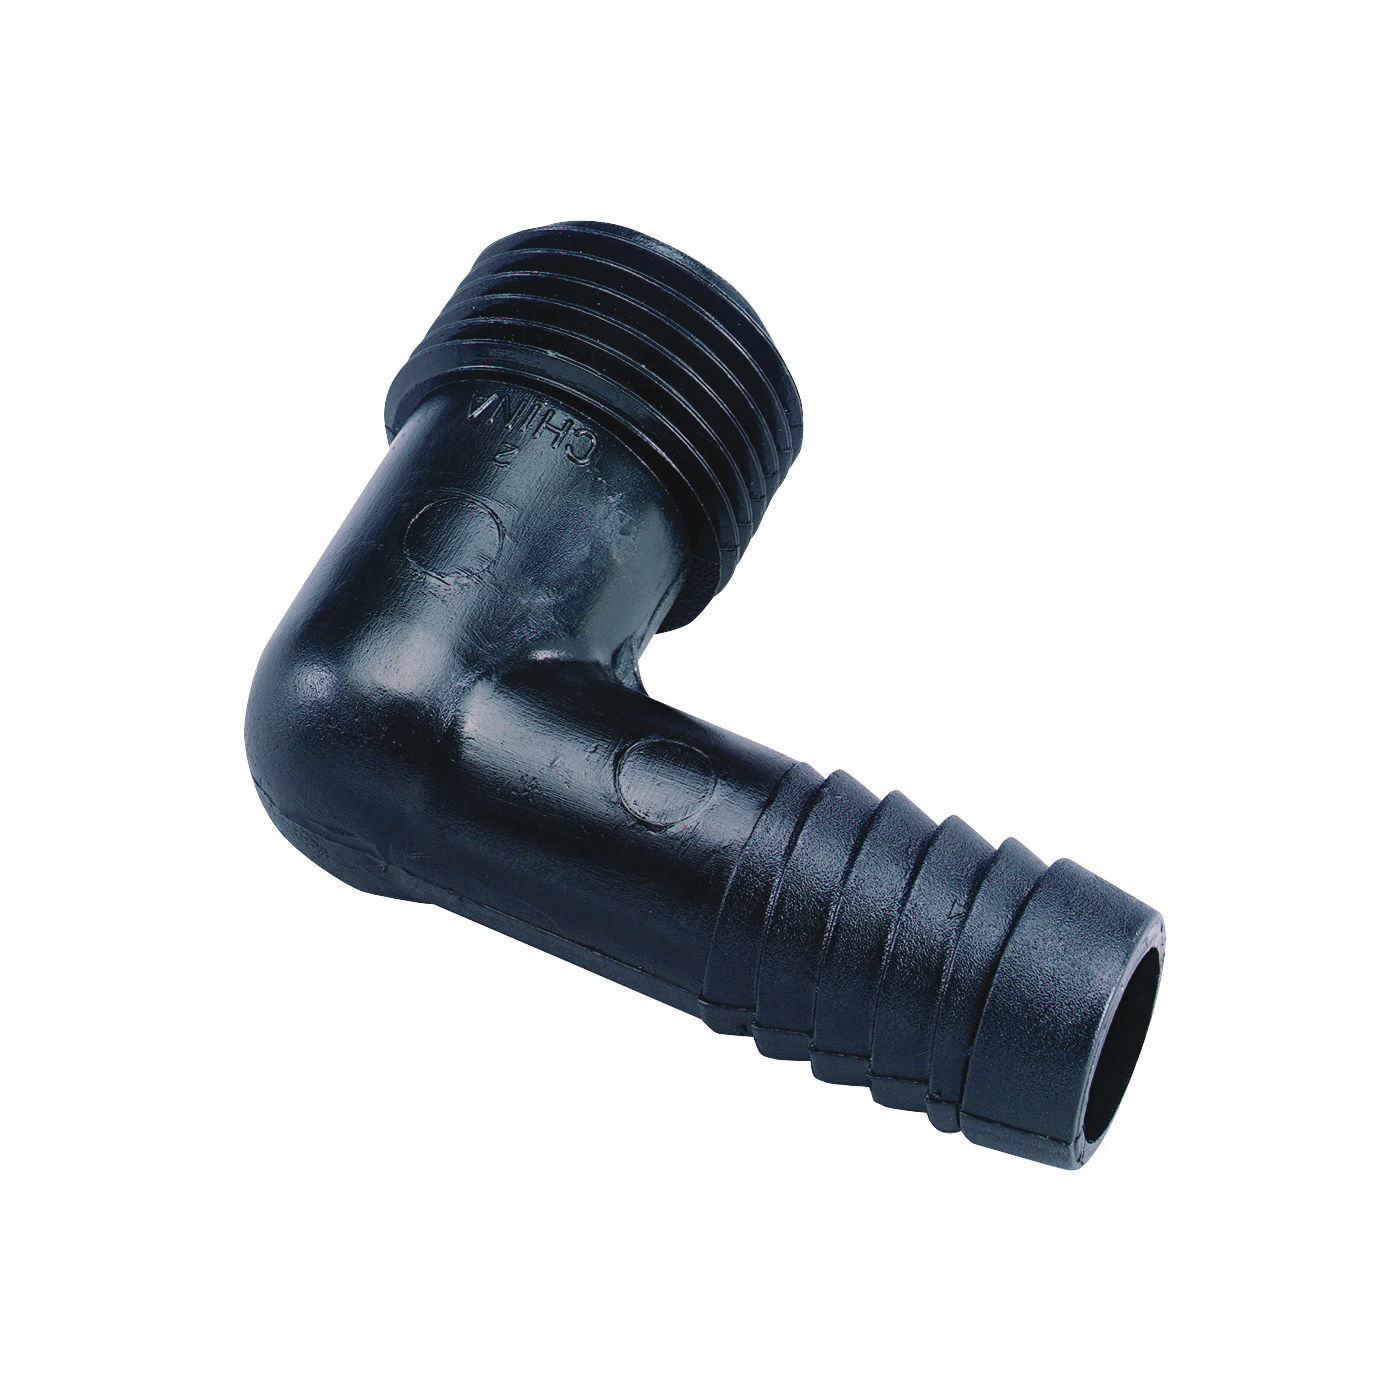 94359 Elbow, 1/2 in Connection, MNPT x Barb, Plastic, Black